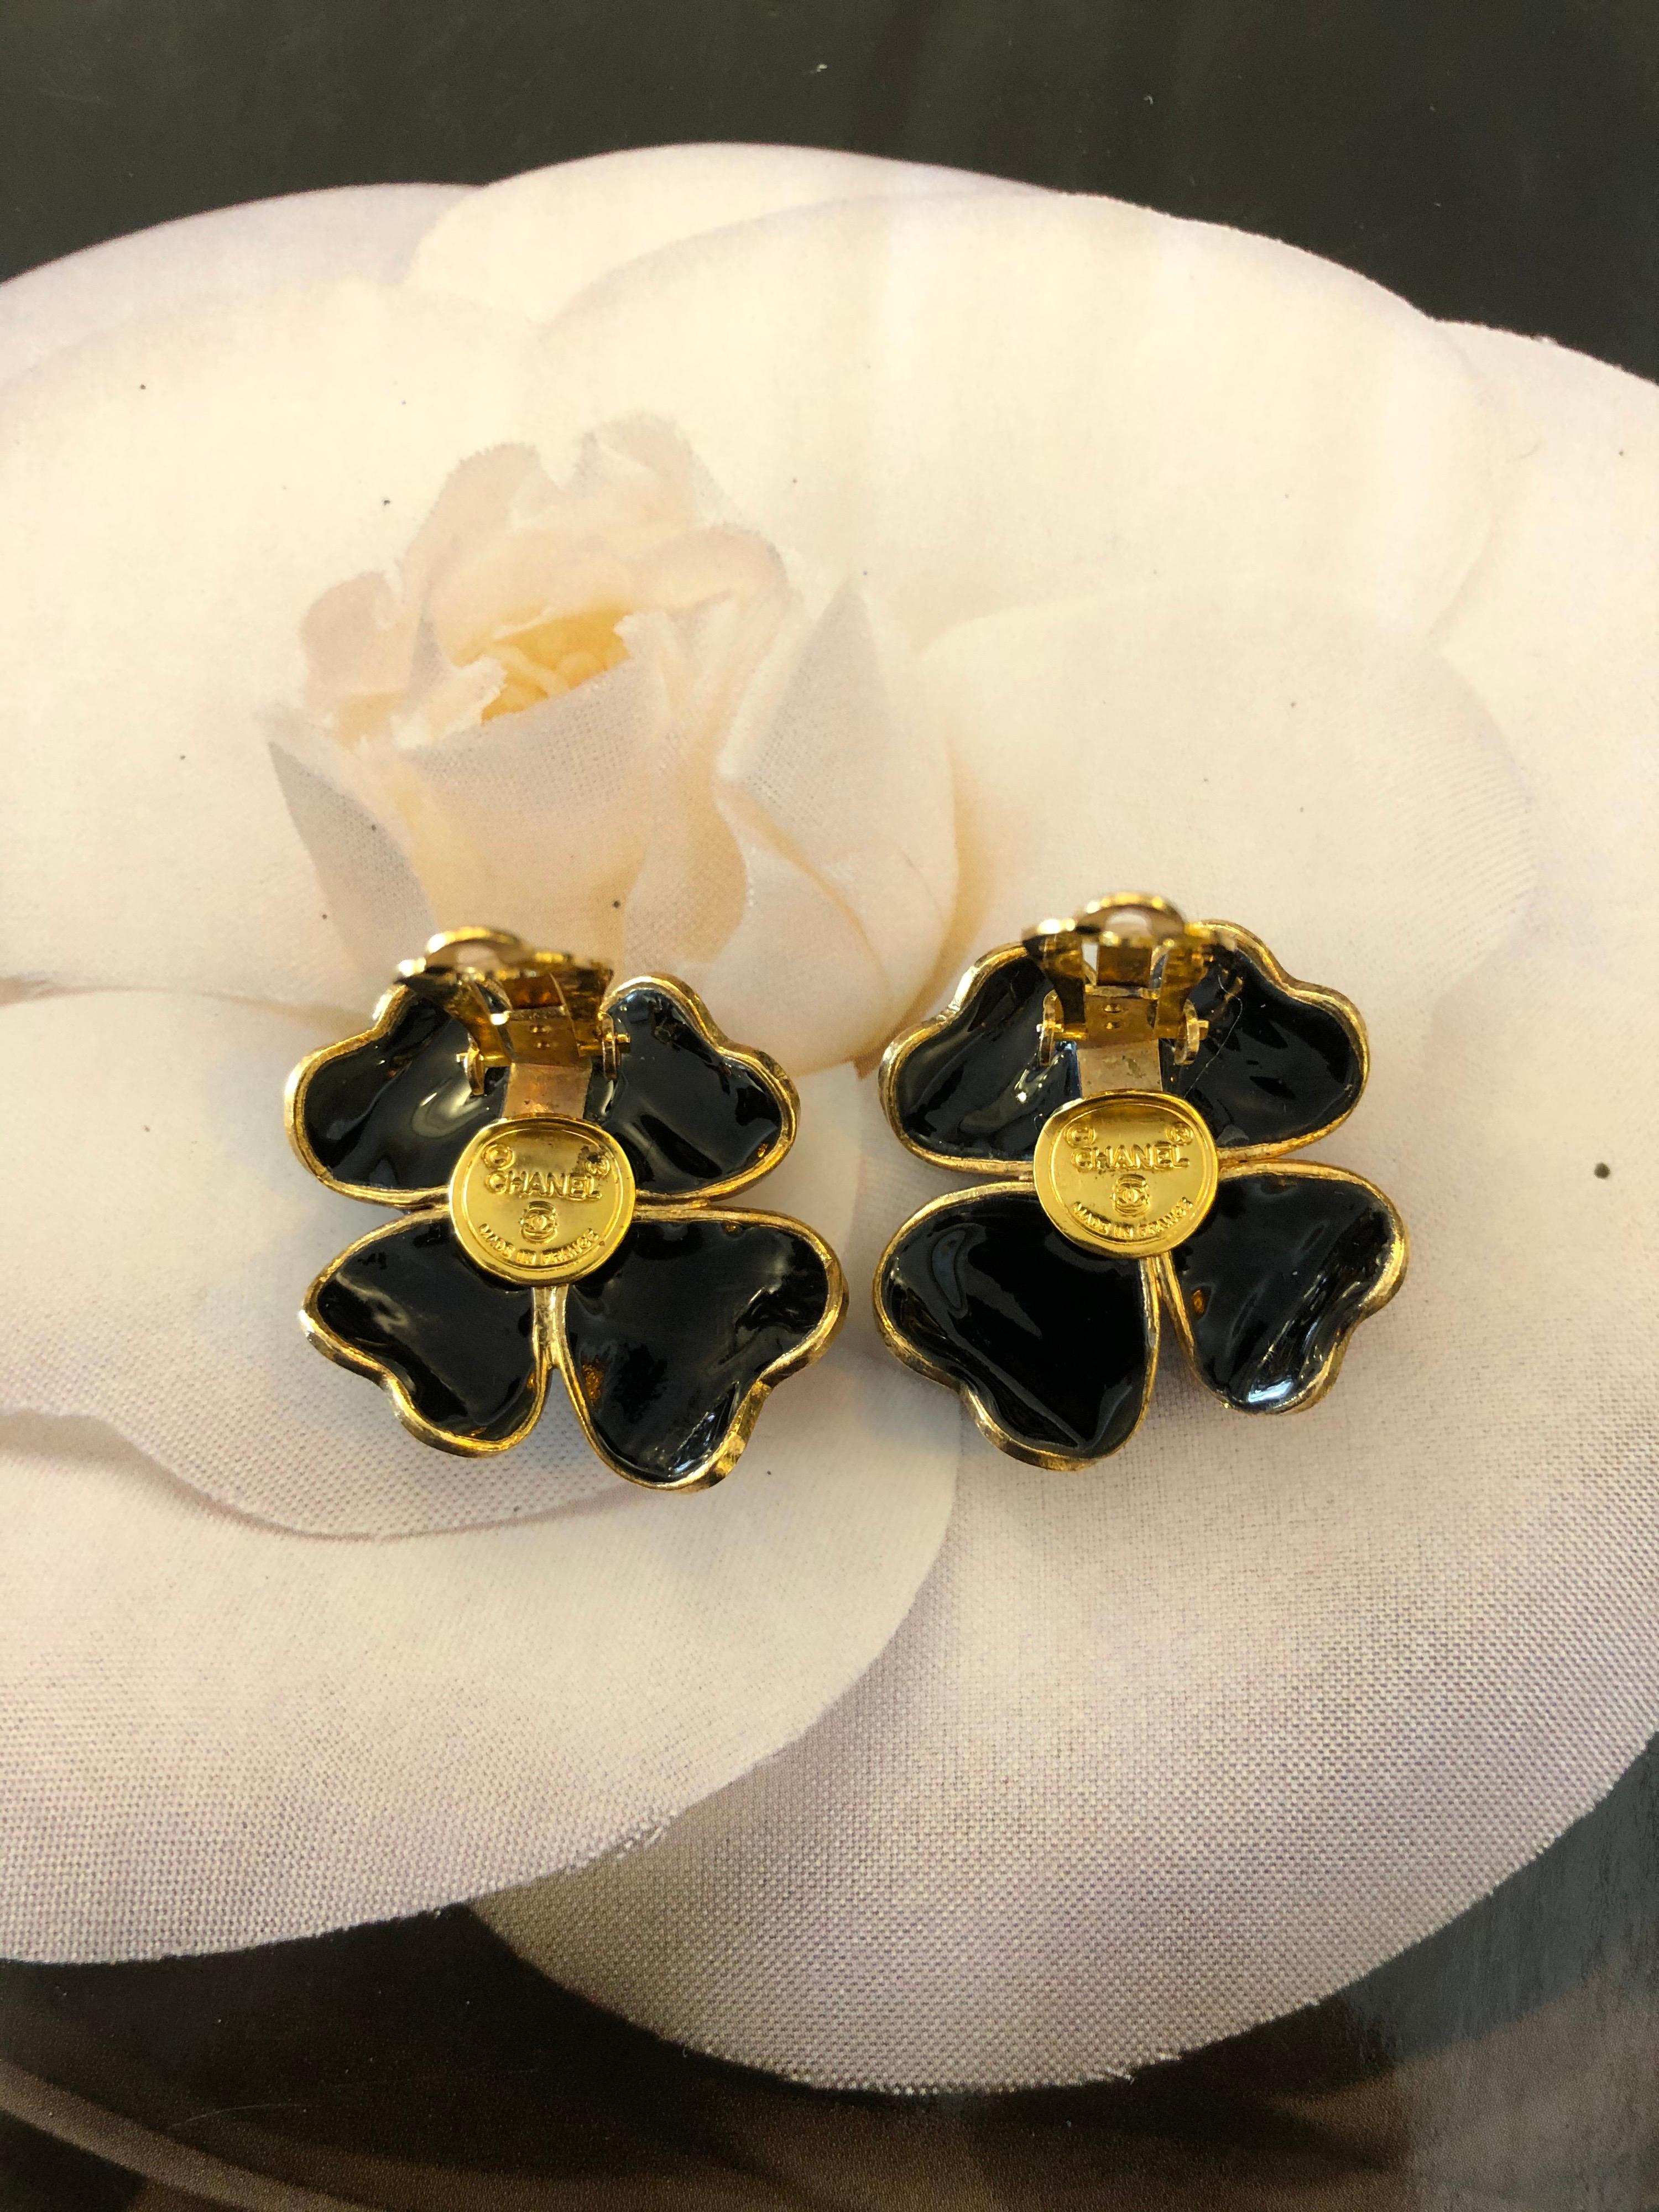 Rare 1970s Chanel gold toned earclips featuring four black gripoix clover leaves and a red coral center. Gripoix is made by pouring molten glass into a mold using a sophisticated technique for setting enameling colored, cast glass in intricate metal